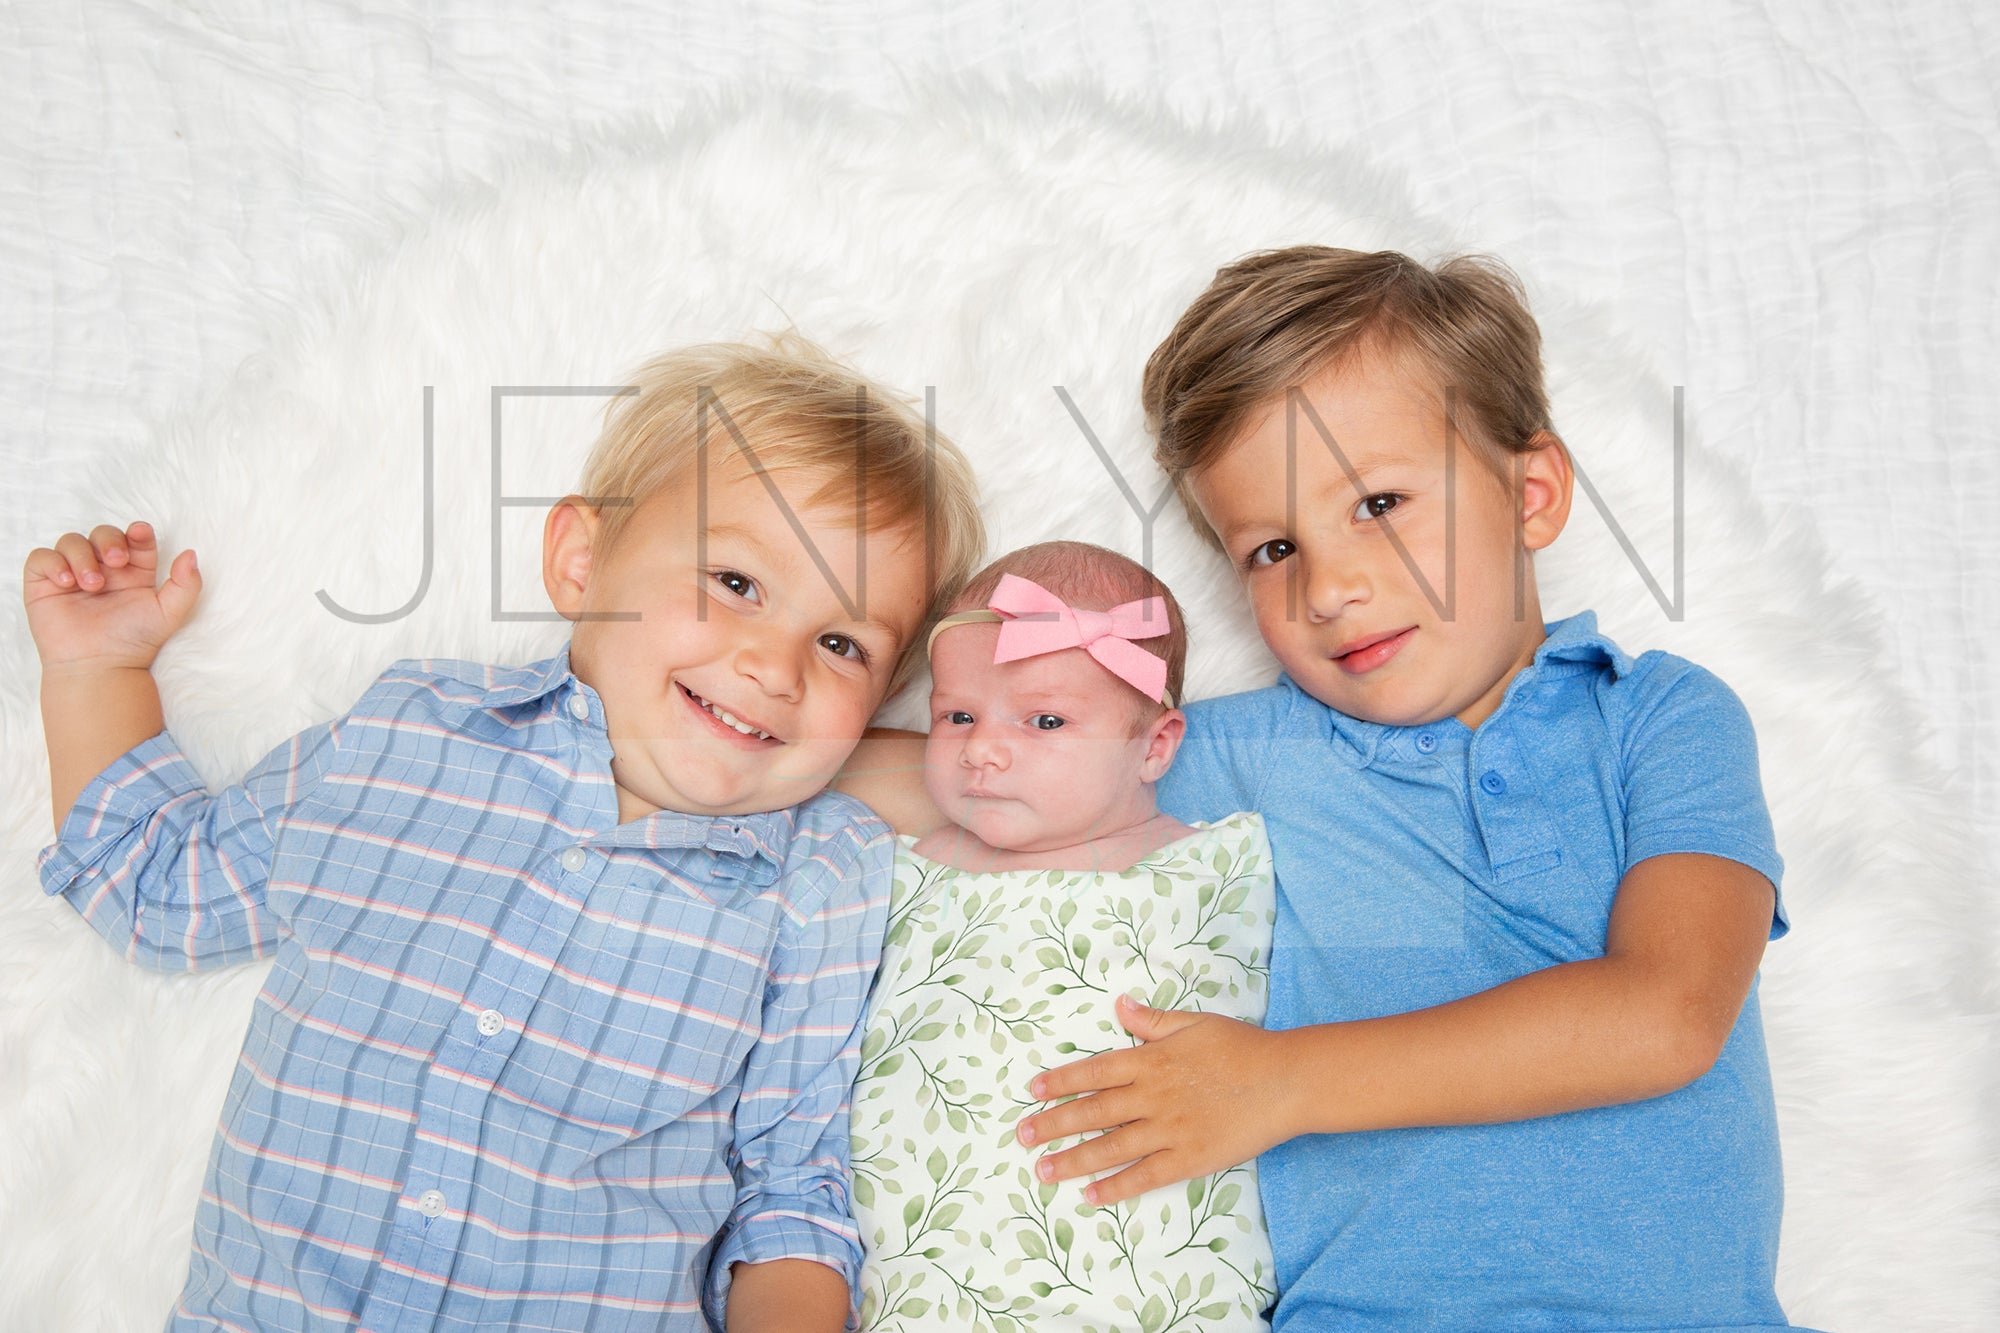 Jersey Baby Girl with Brothers Blanket Mockup #10 PSD